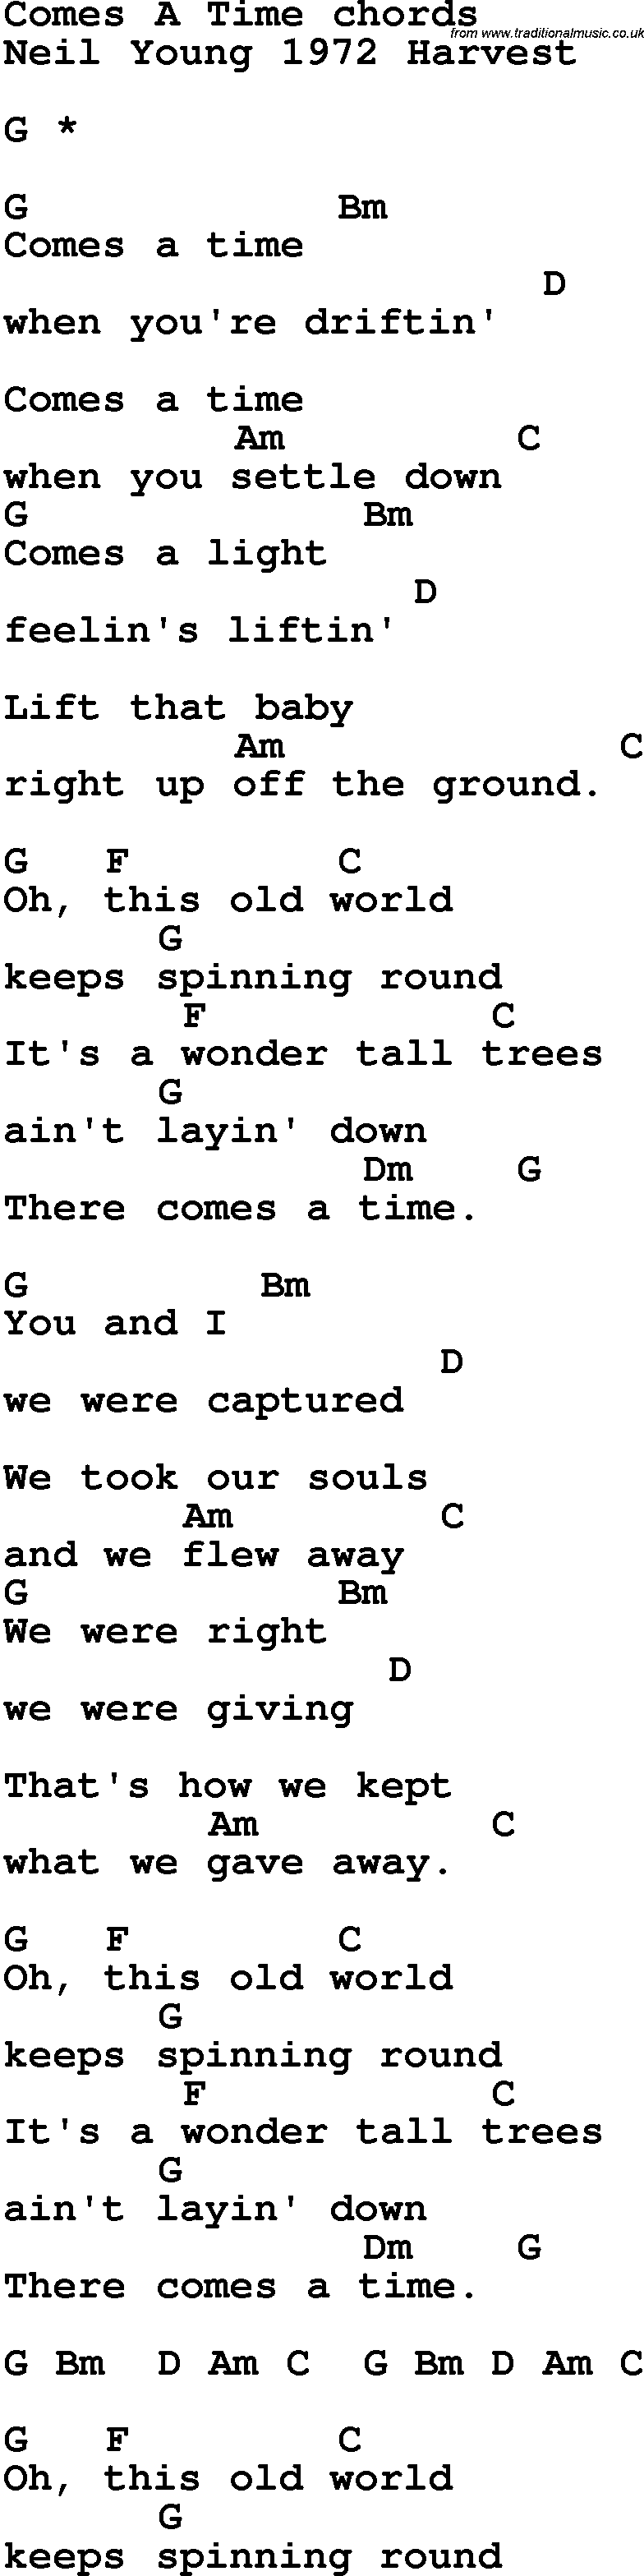 Song Lyrics with guitar chords for Comes A Time - Neil Young 1972